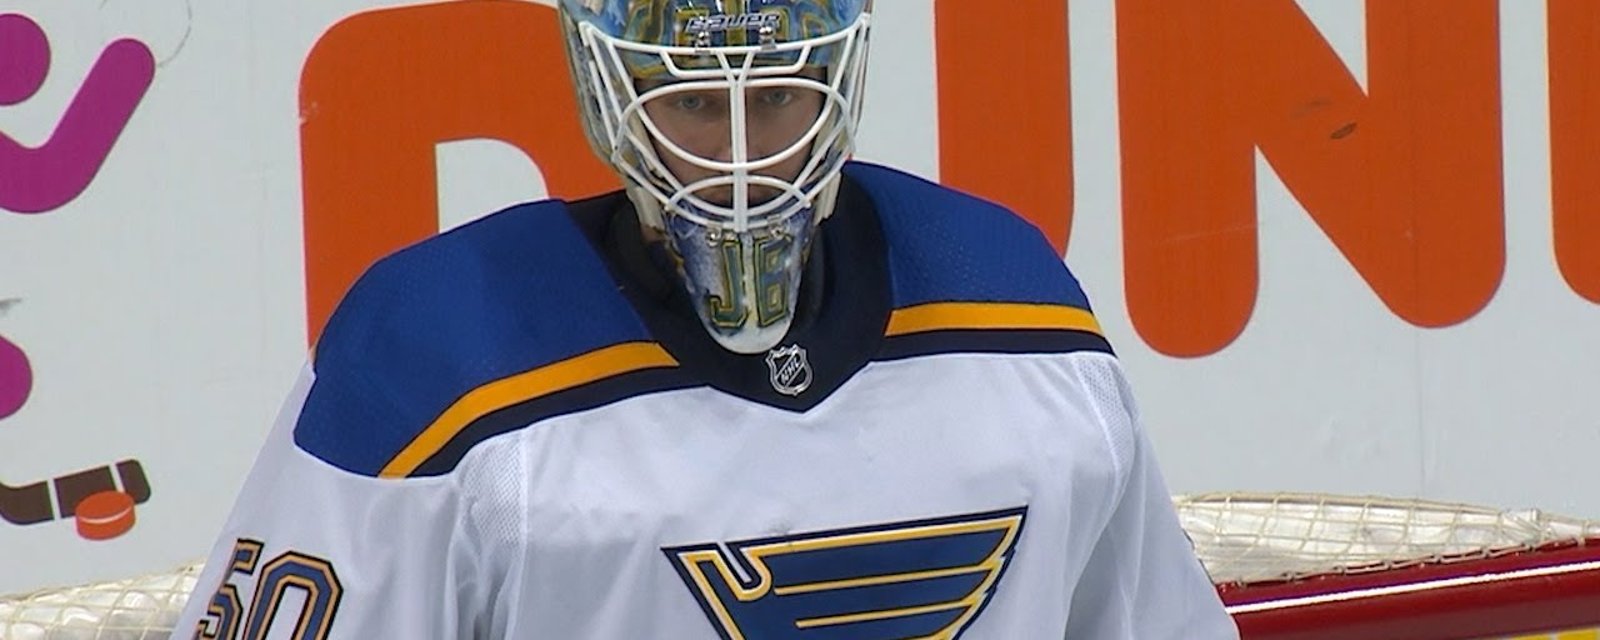 Goalie Binnington caught trying to hit Vegas players with his stick after they scored! 